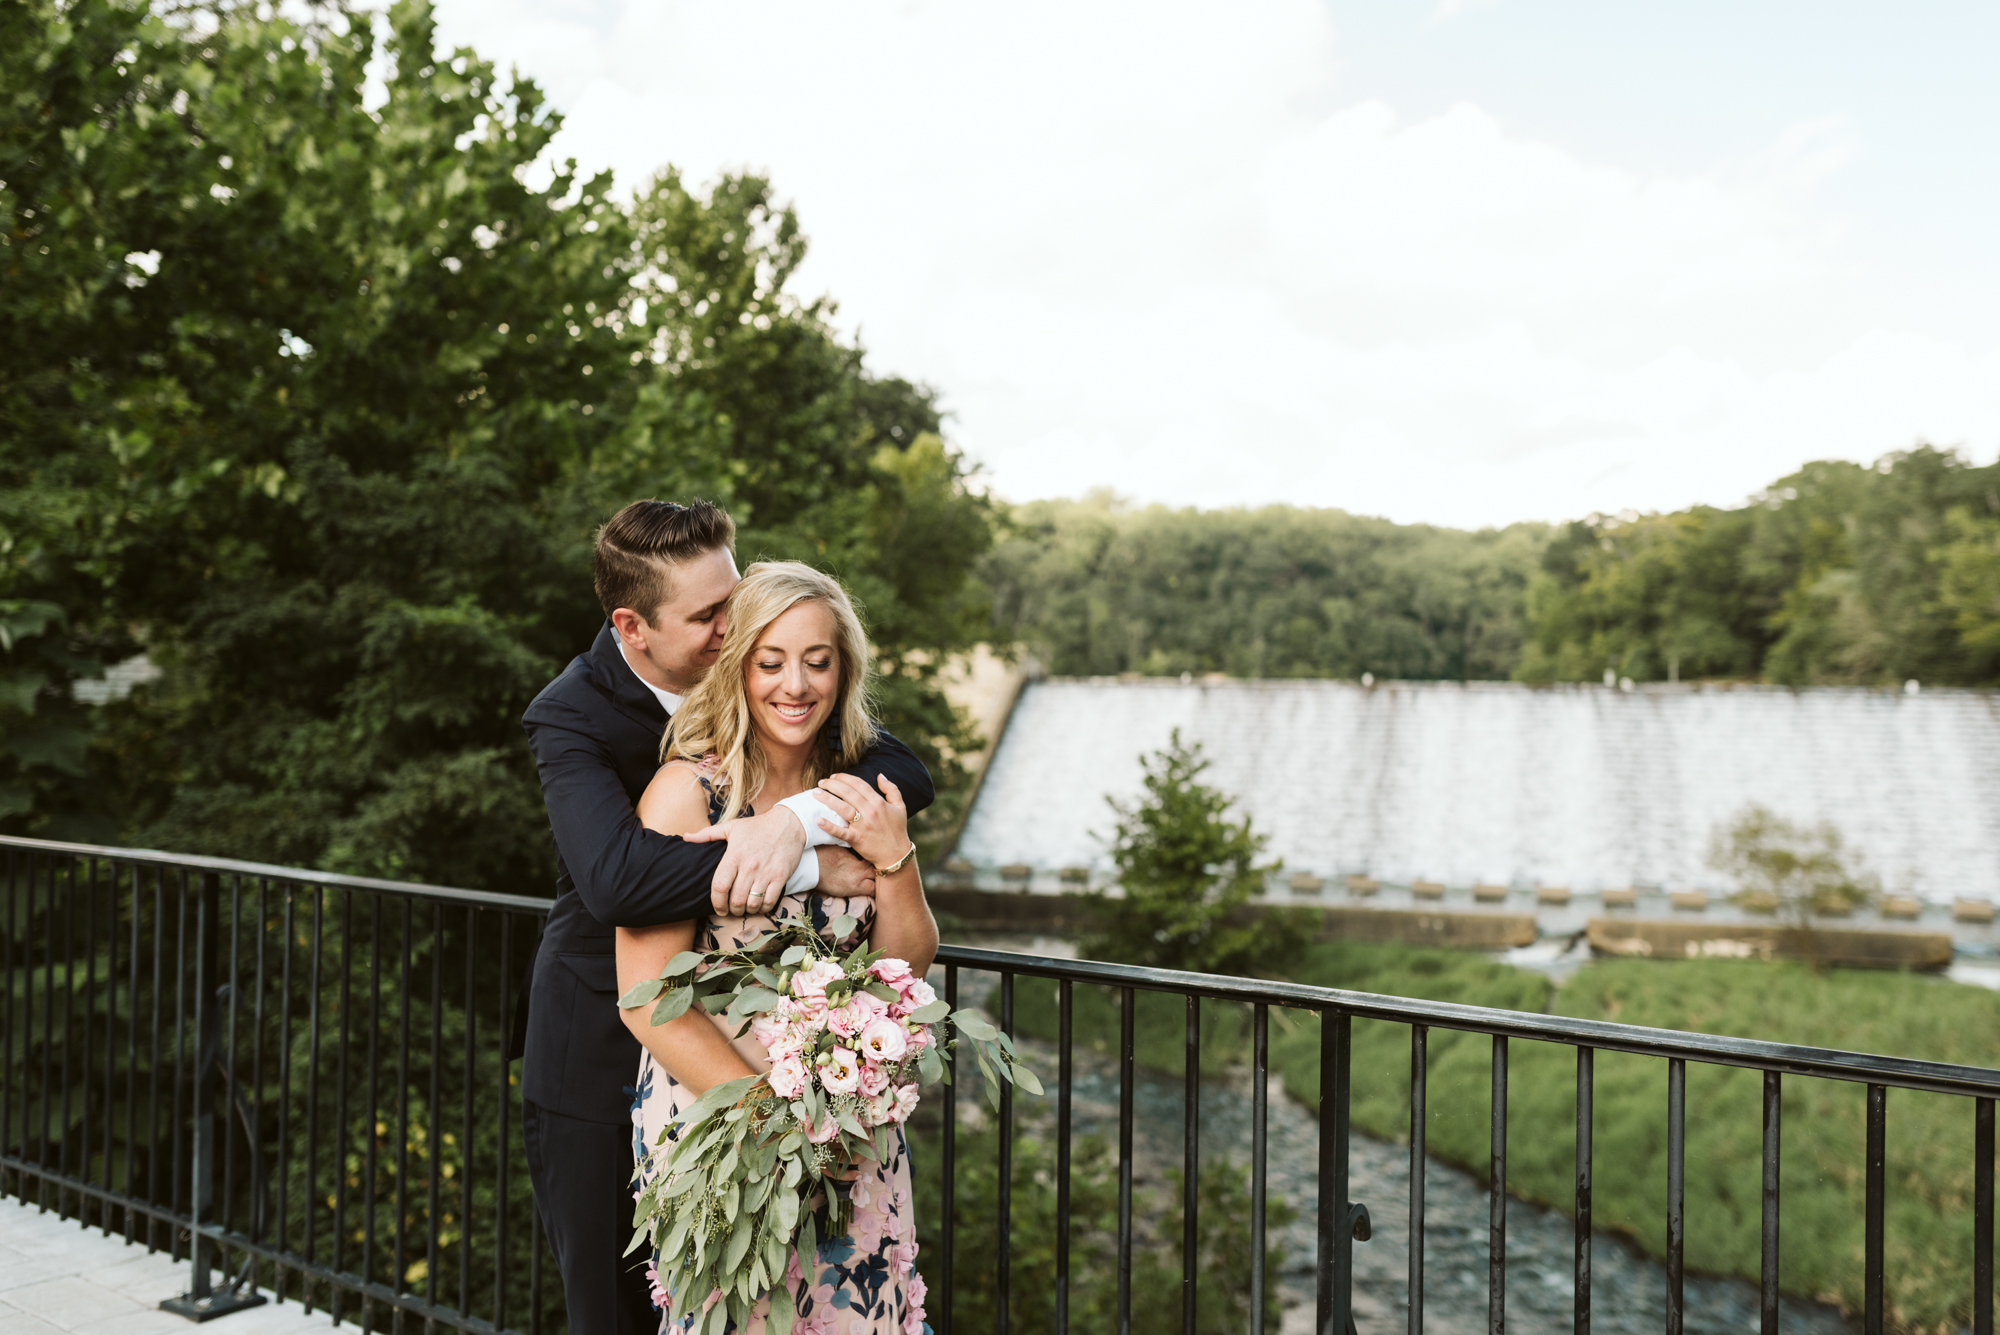 Outdoor Wedding, Casual, Simple, Lake Roland, Baltimore, Maryland Wedding Photographer, Laid Back, DIY Flowers, Bouquet with Eucalyptus and Lisianthus, Bride and Groom Hugging on Bridge